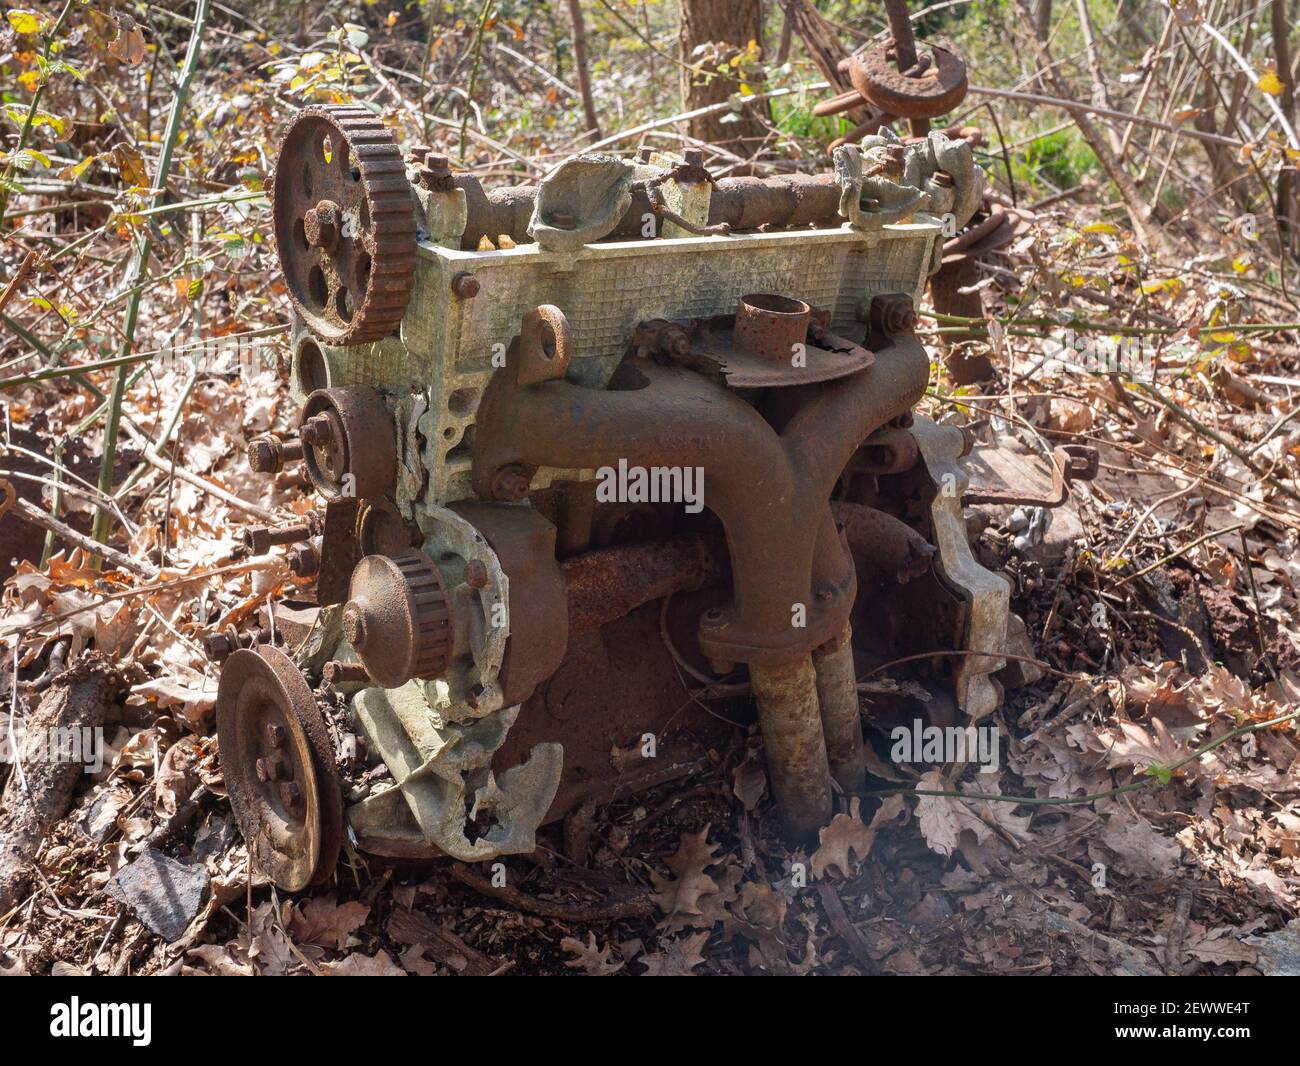 engine of a car abandoned in nature,  a symbol of degradation and pollution of the natural environment Stock Photo